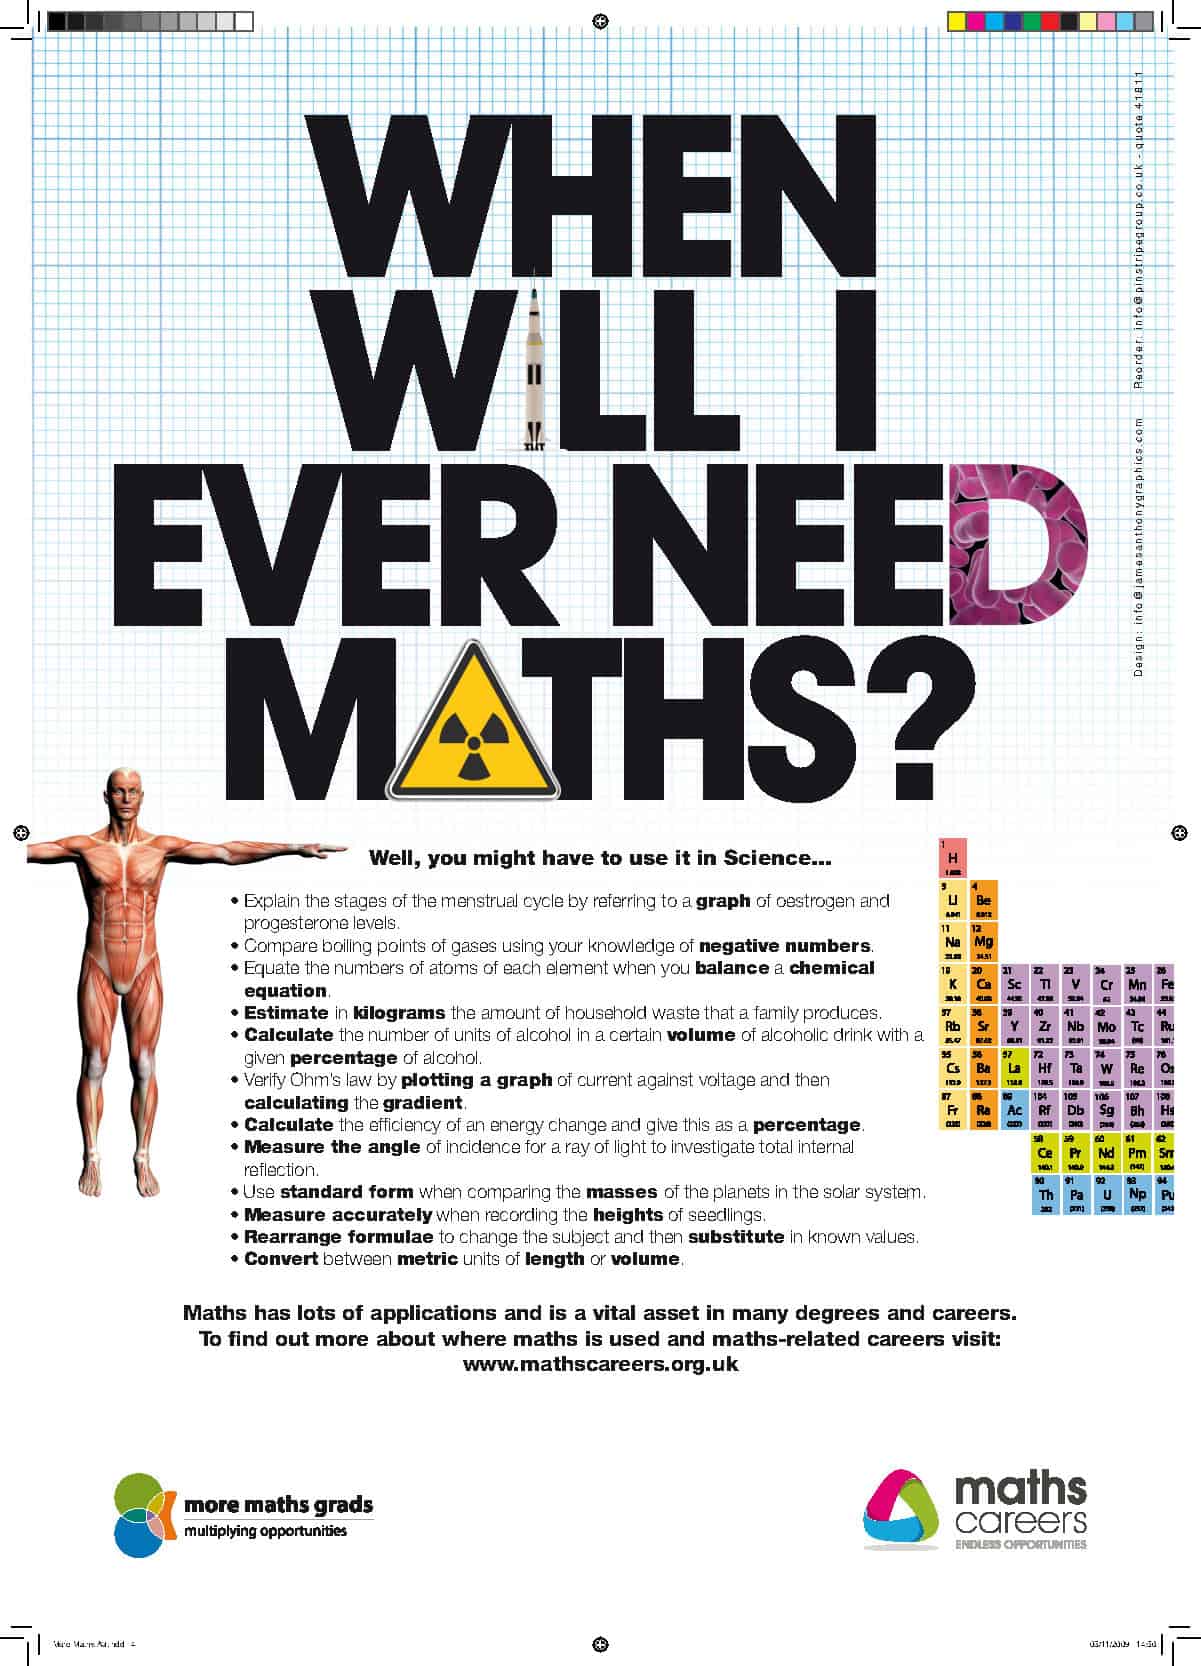 posters-and-resources-from-maths-in-a-box-maths-careers